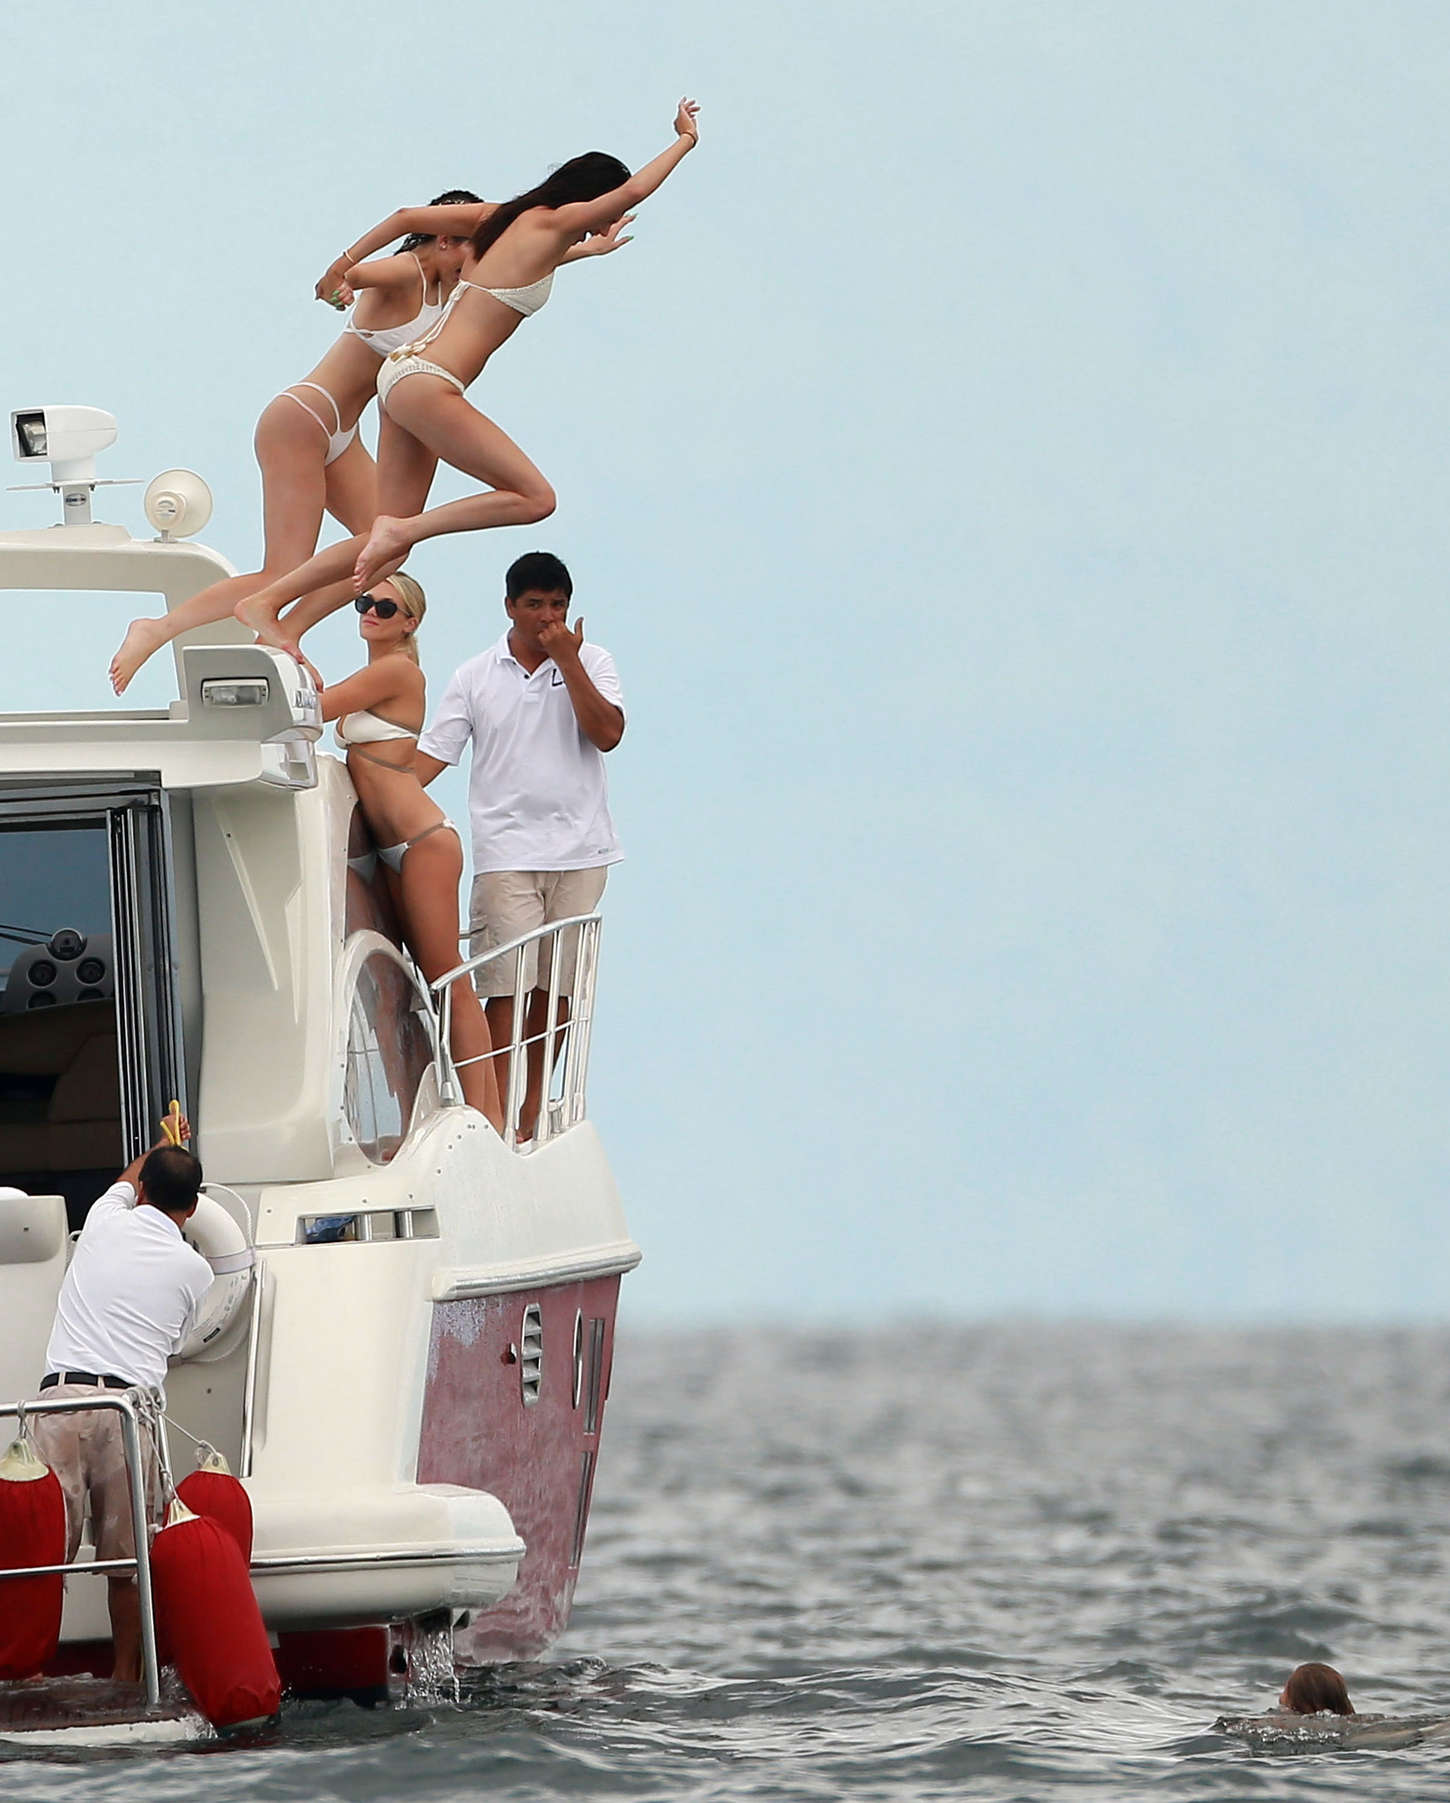 Kylie, Kendall Jenner and Hailey Baldwin: Bikini Candids at Yacht in Mexico-30 | GotCeleb